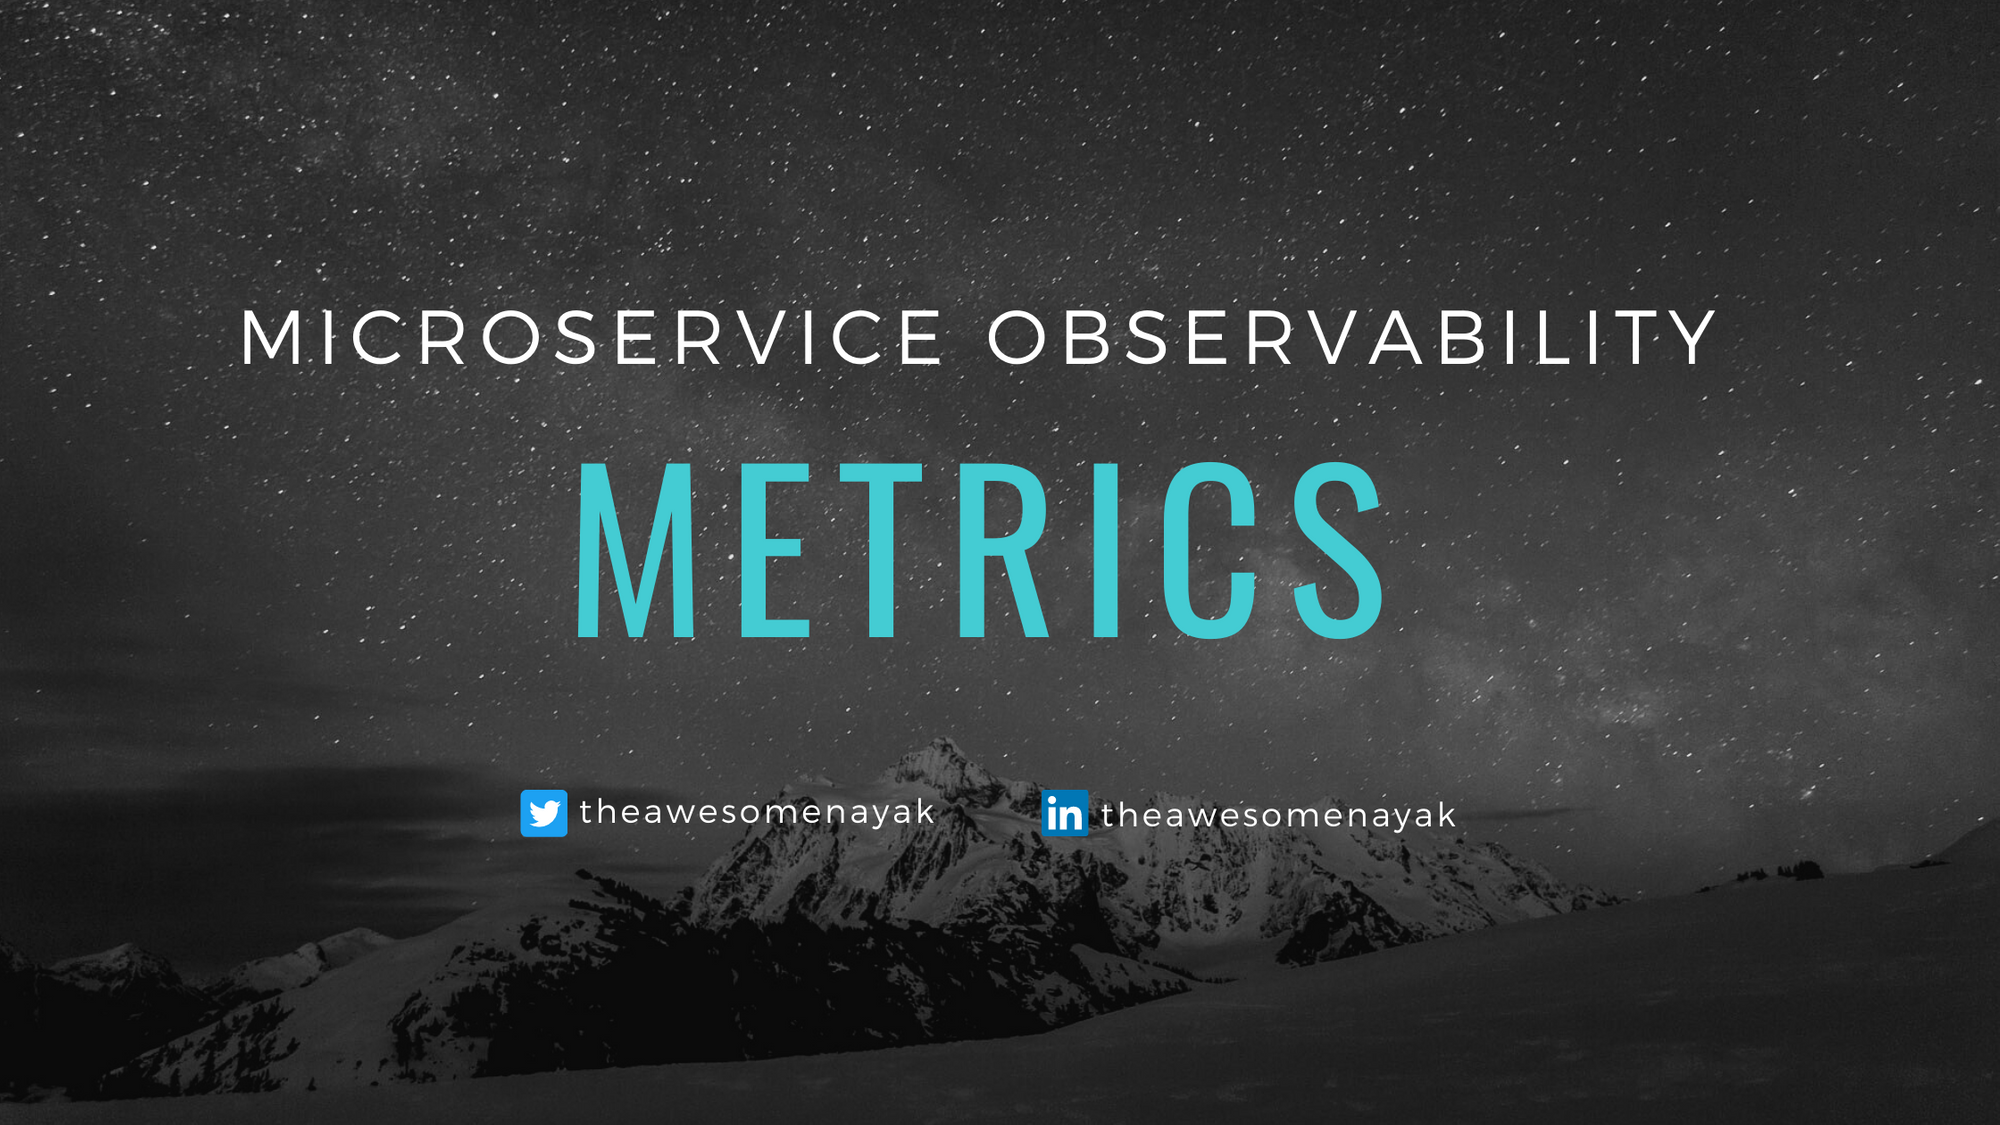 How to Use Metrics to Monitor Your Microservices